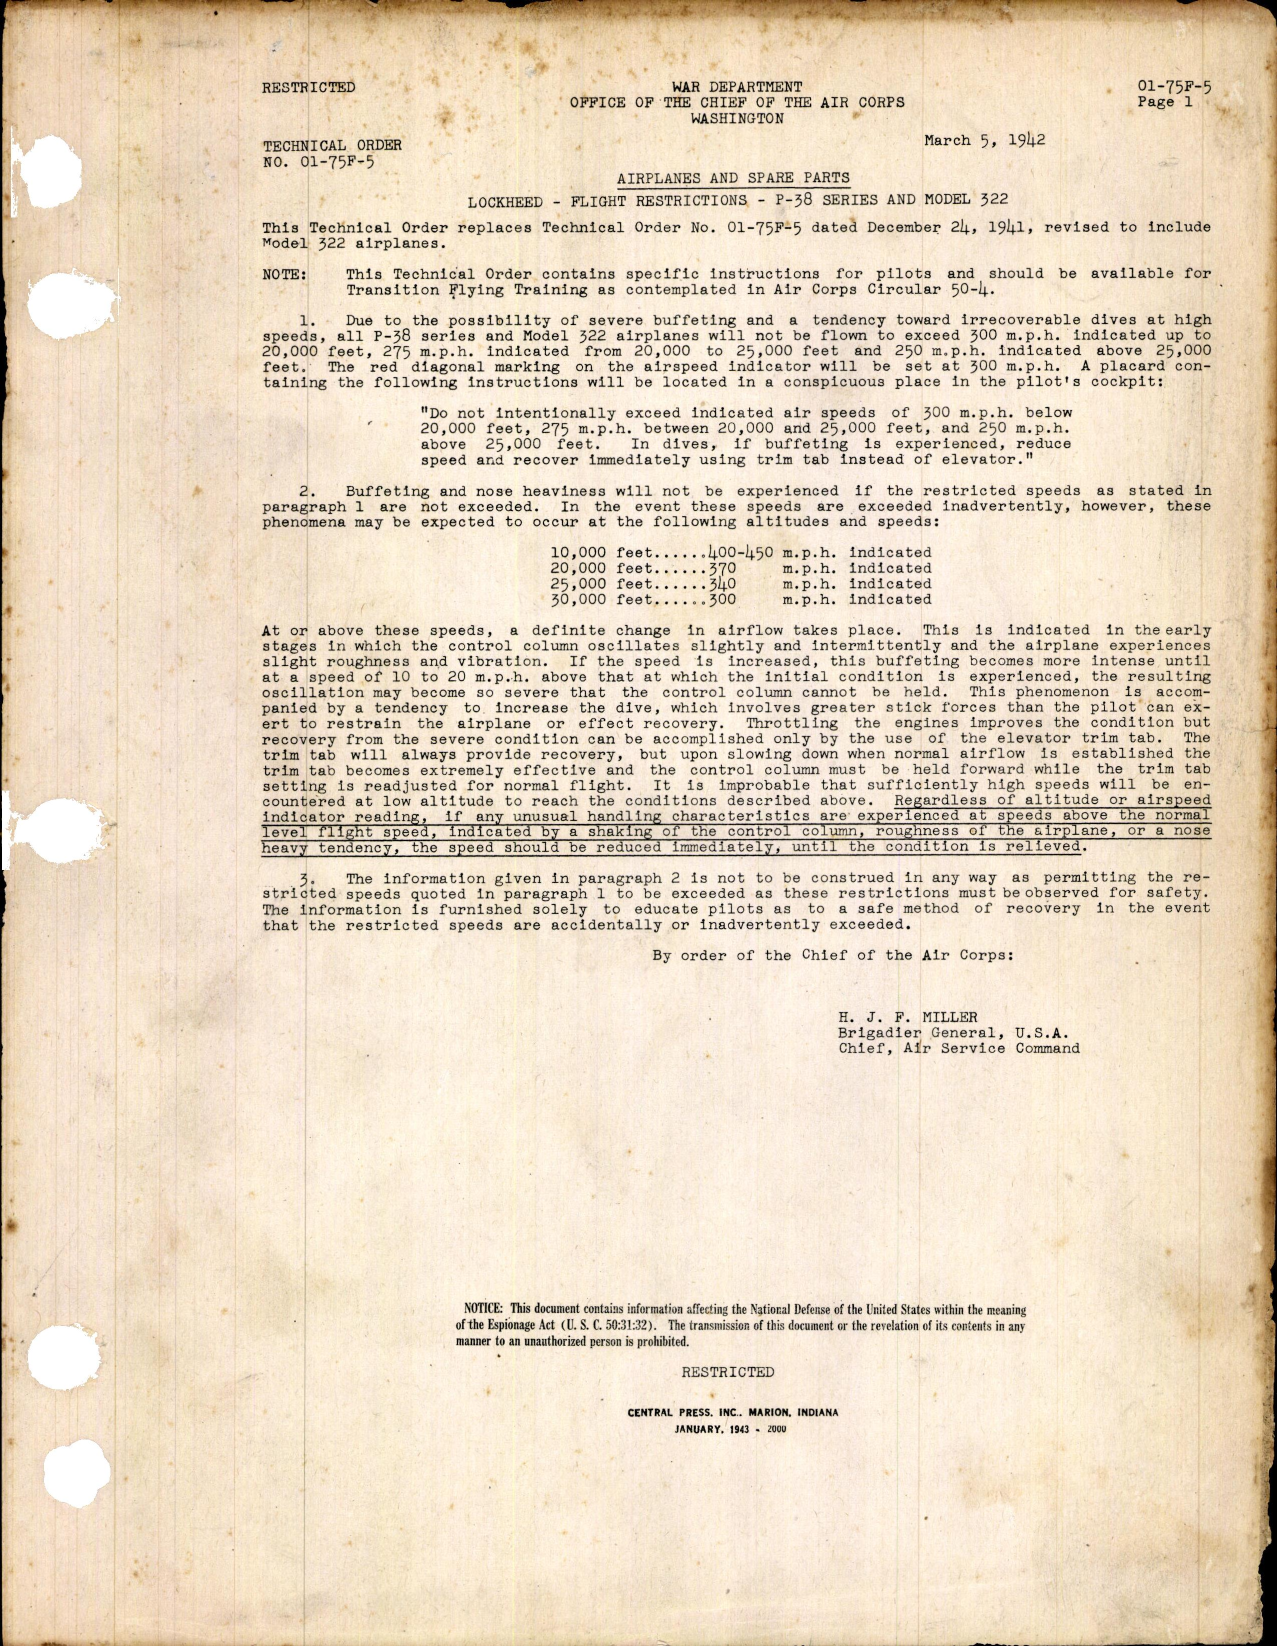 Sample page 1 from AirCorps Library document: Flight Restrictions for P-38 Series and Model 322